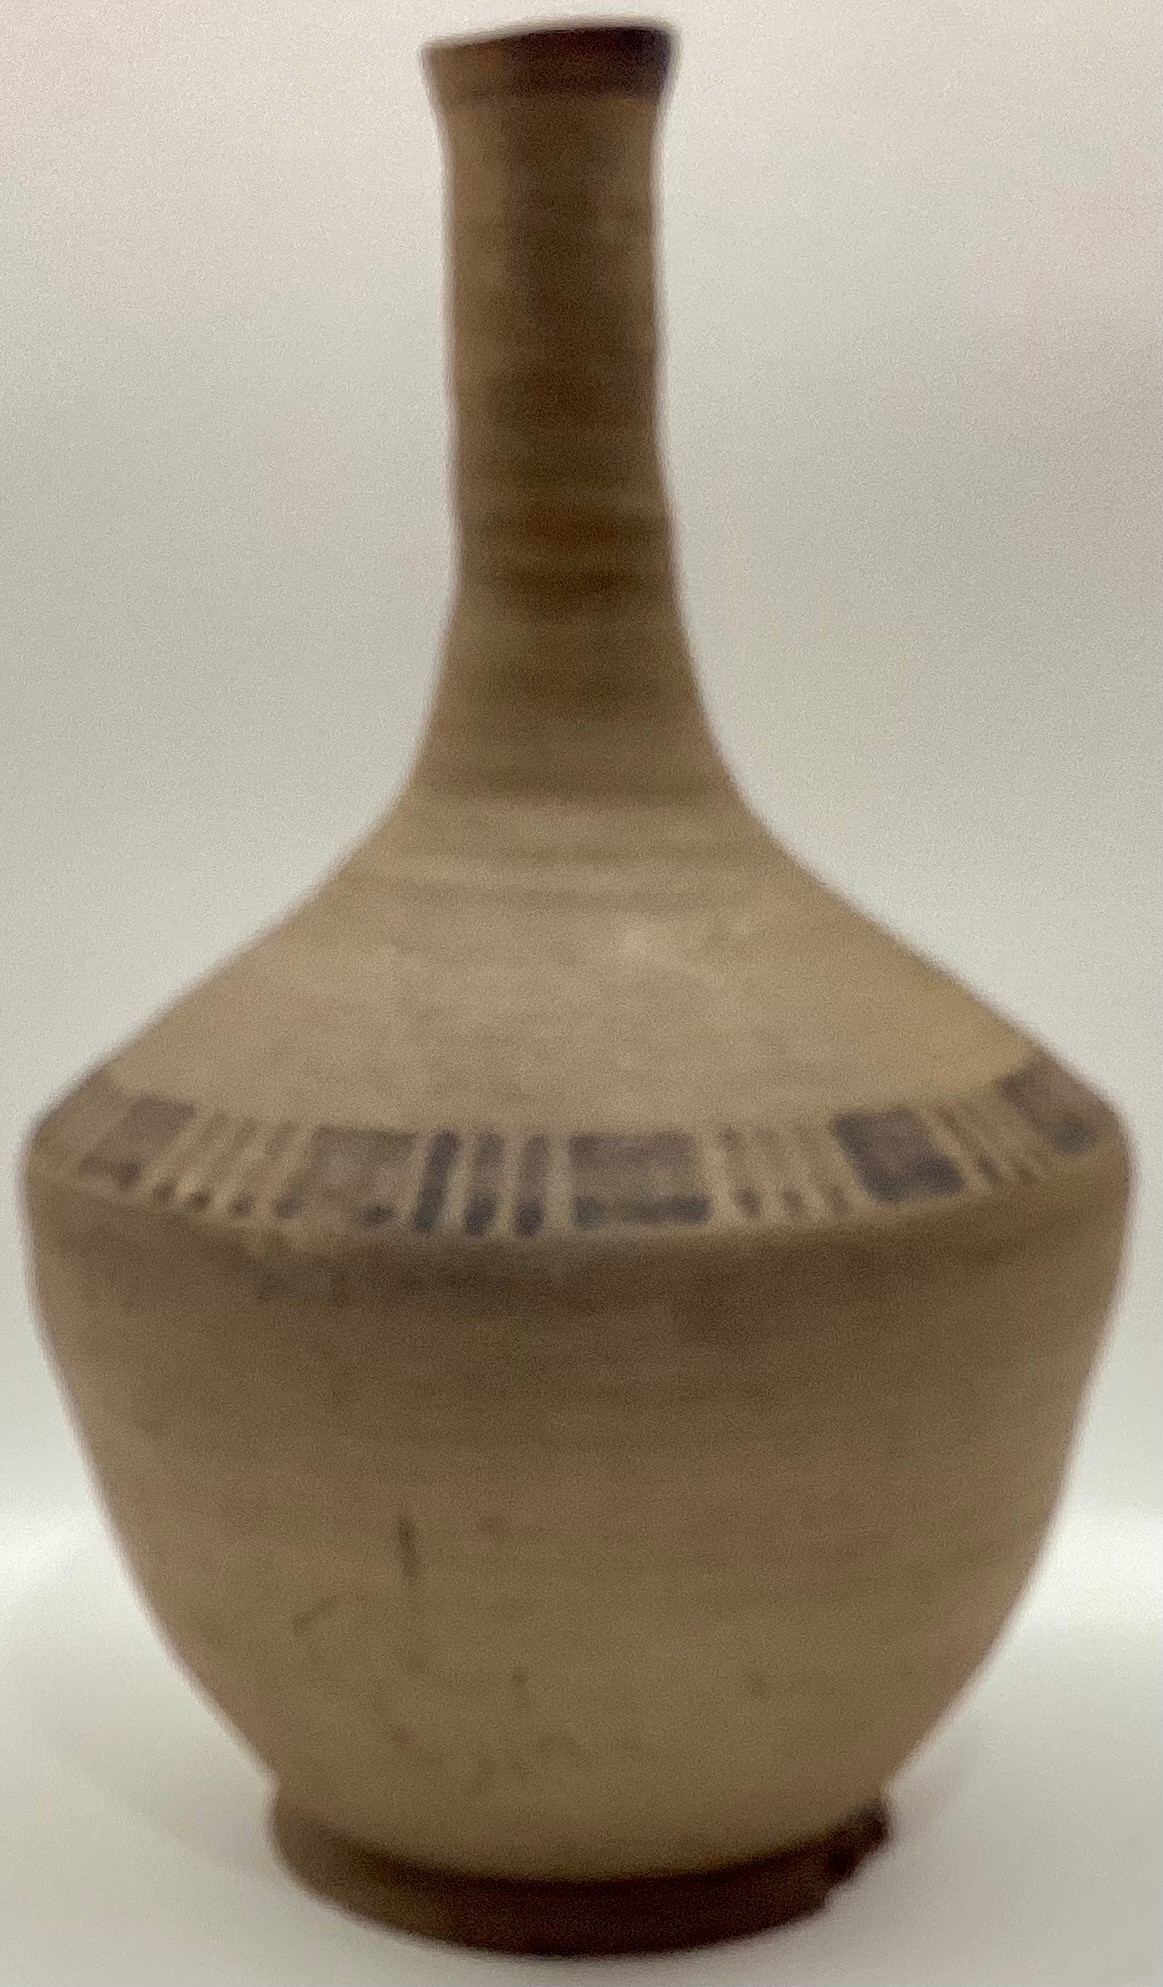 Poole Pottery Carter Stabler Adams very early Etruscan bottle vase 8.25" high. - Image 4 of 4